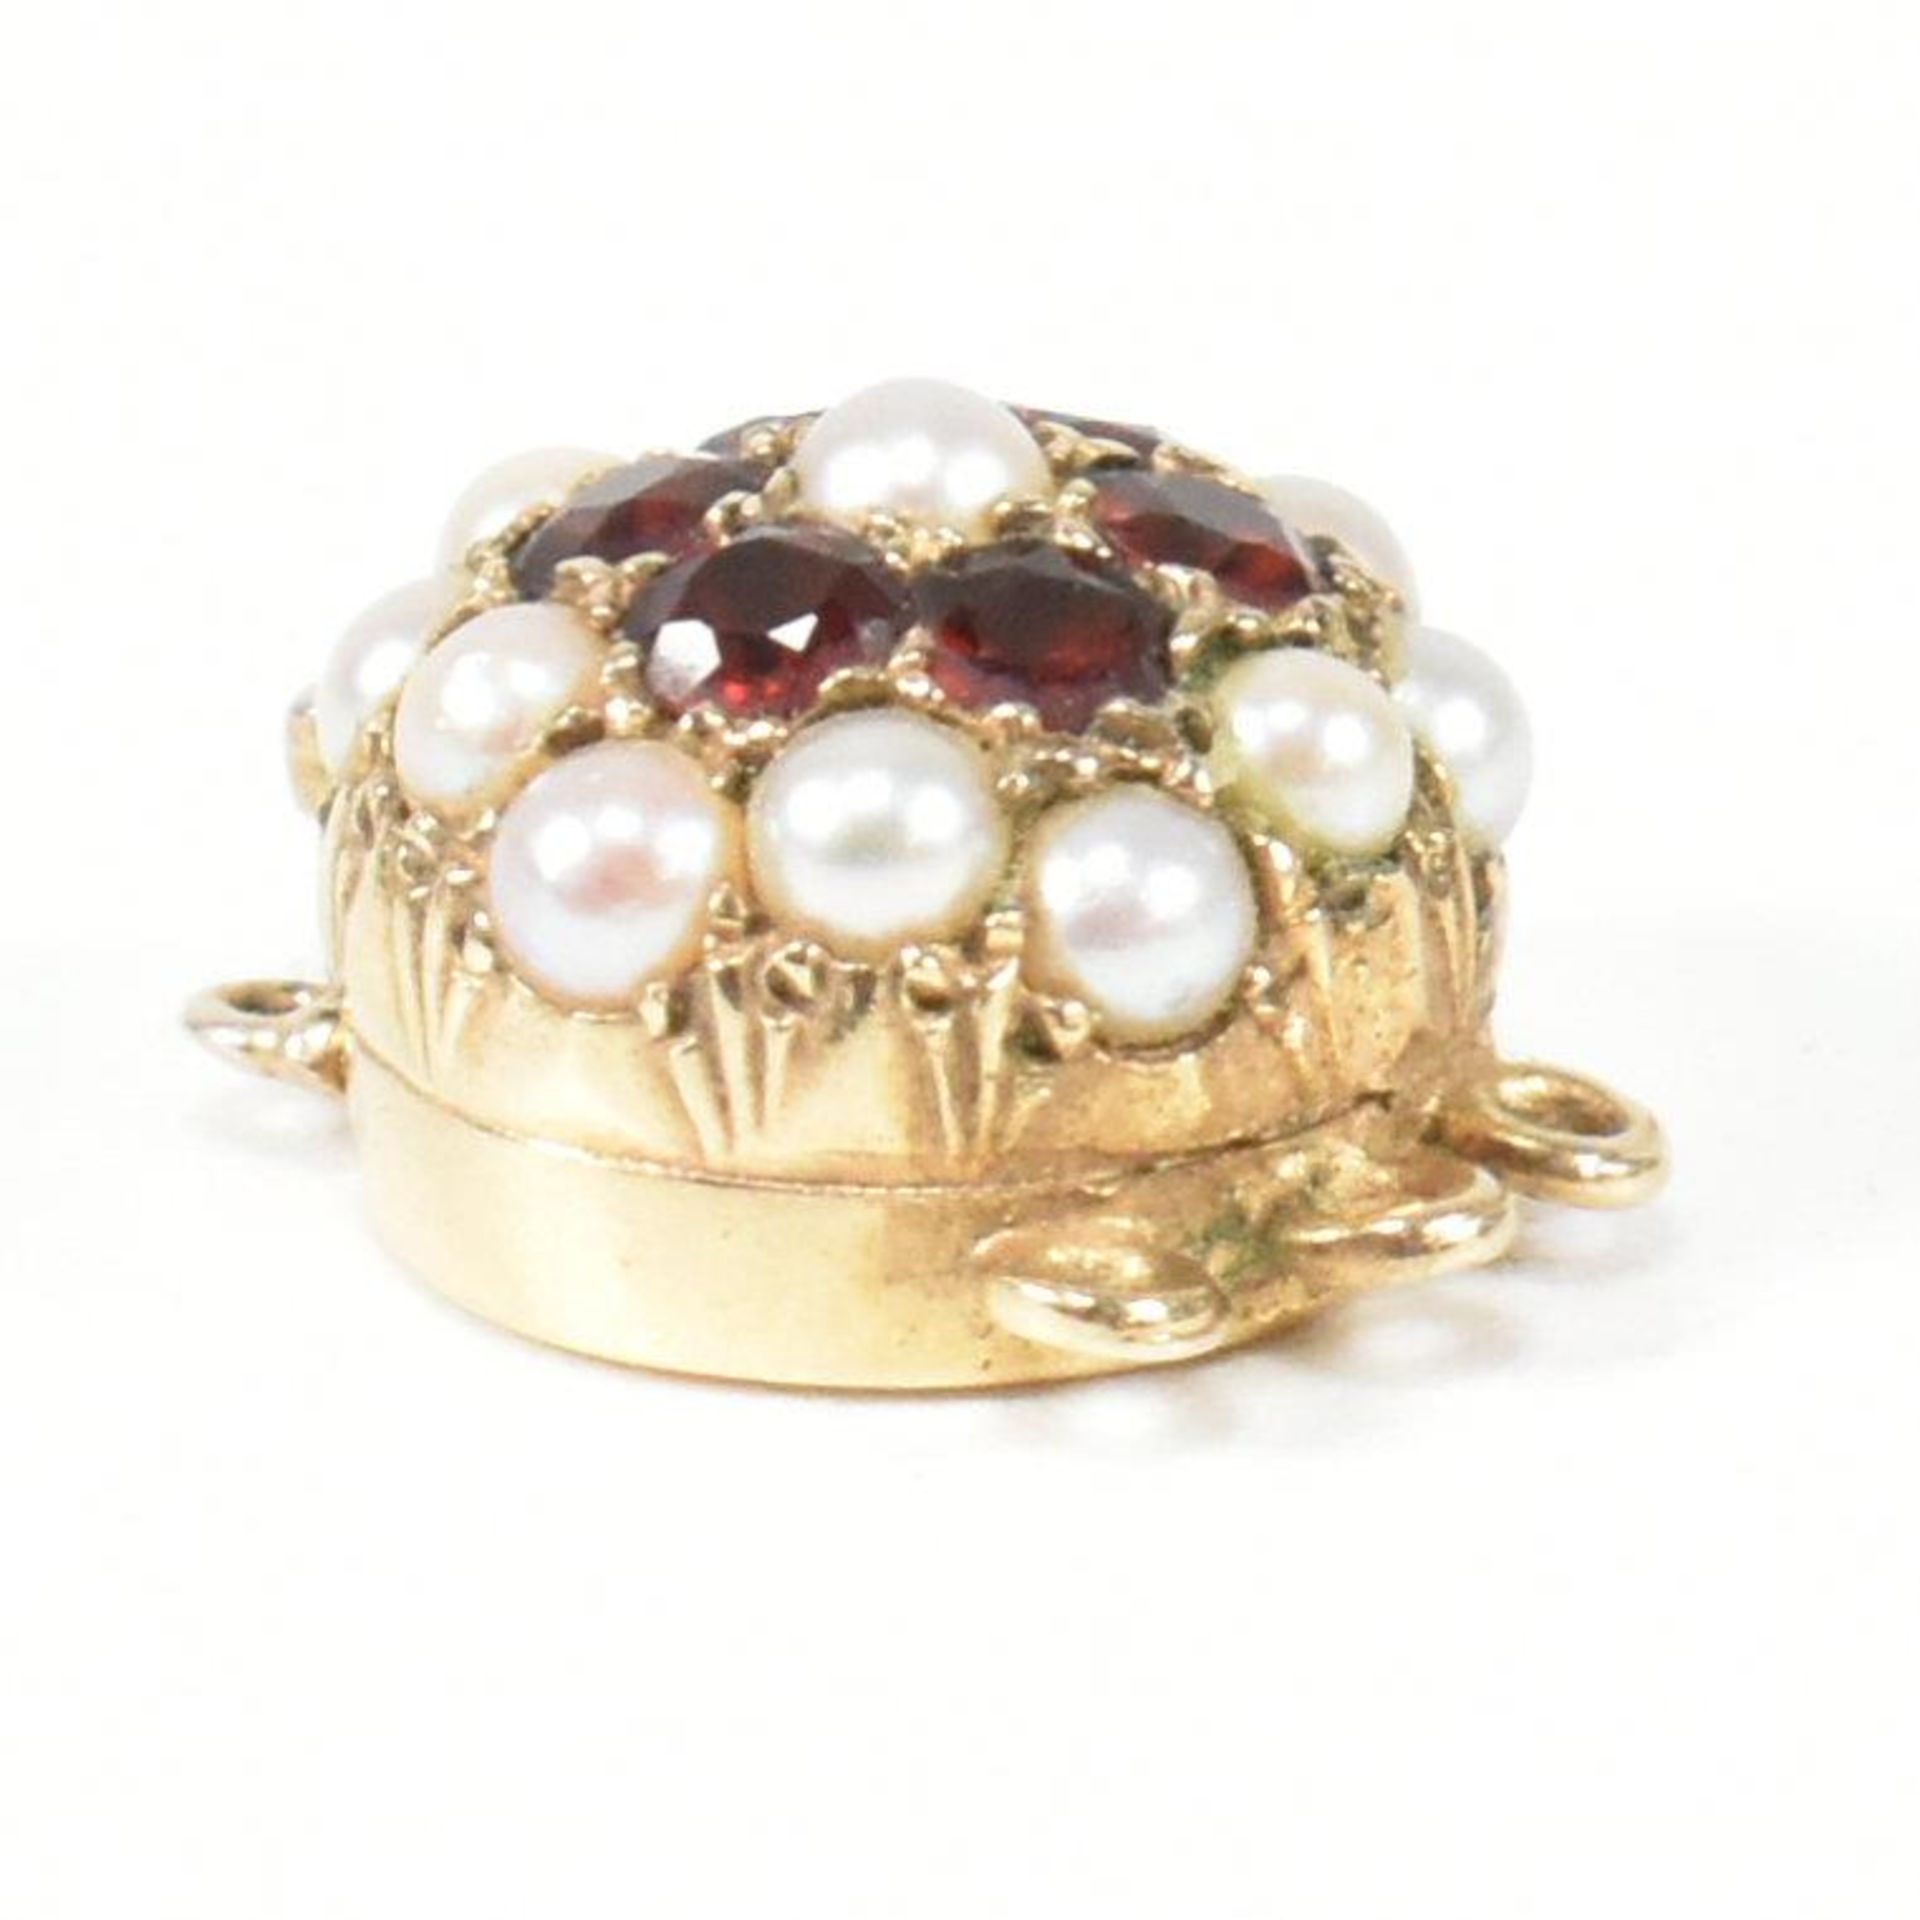 HALLMARKED 9CT GOLD PEARL & GARNET CLUSTER NECKLACE BOX CLASP - Image 6 of 7